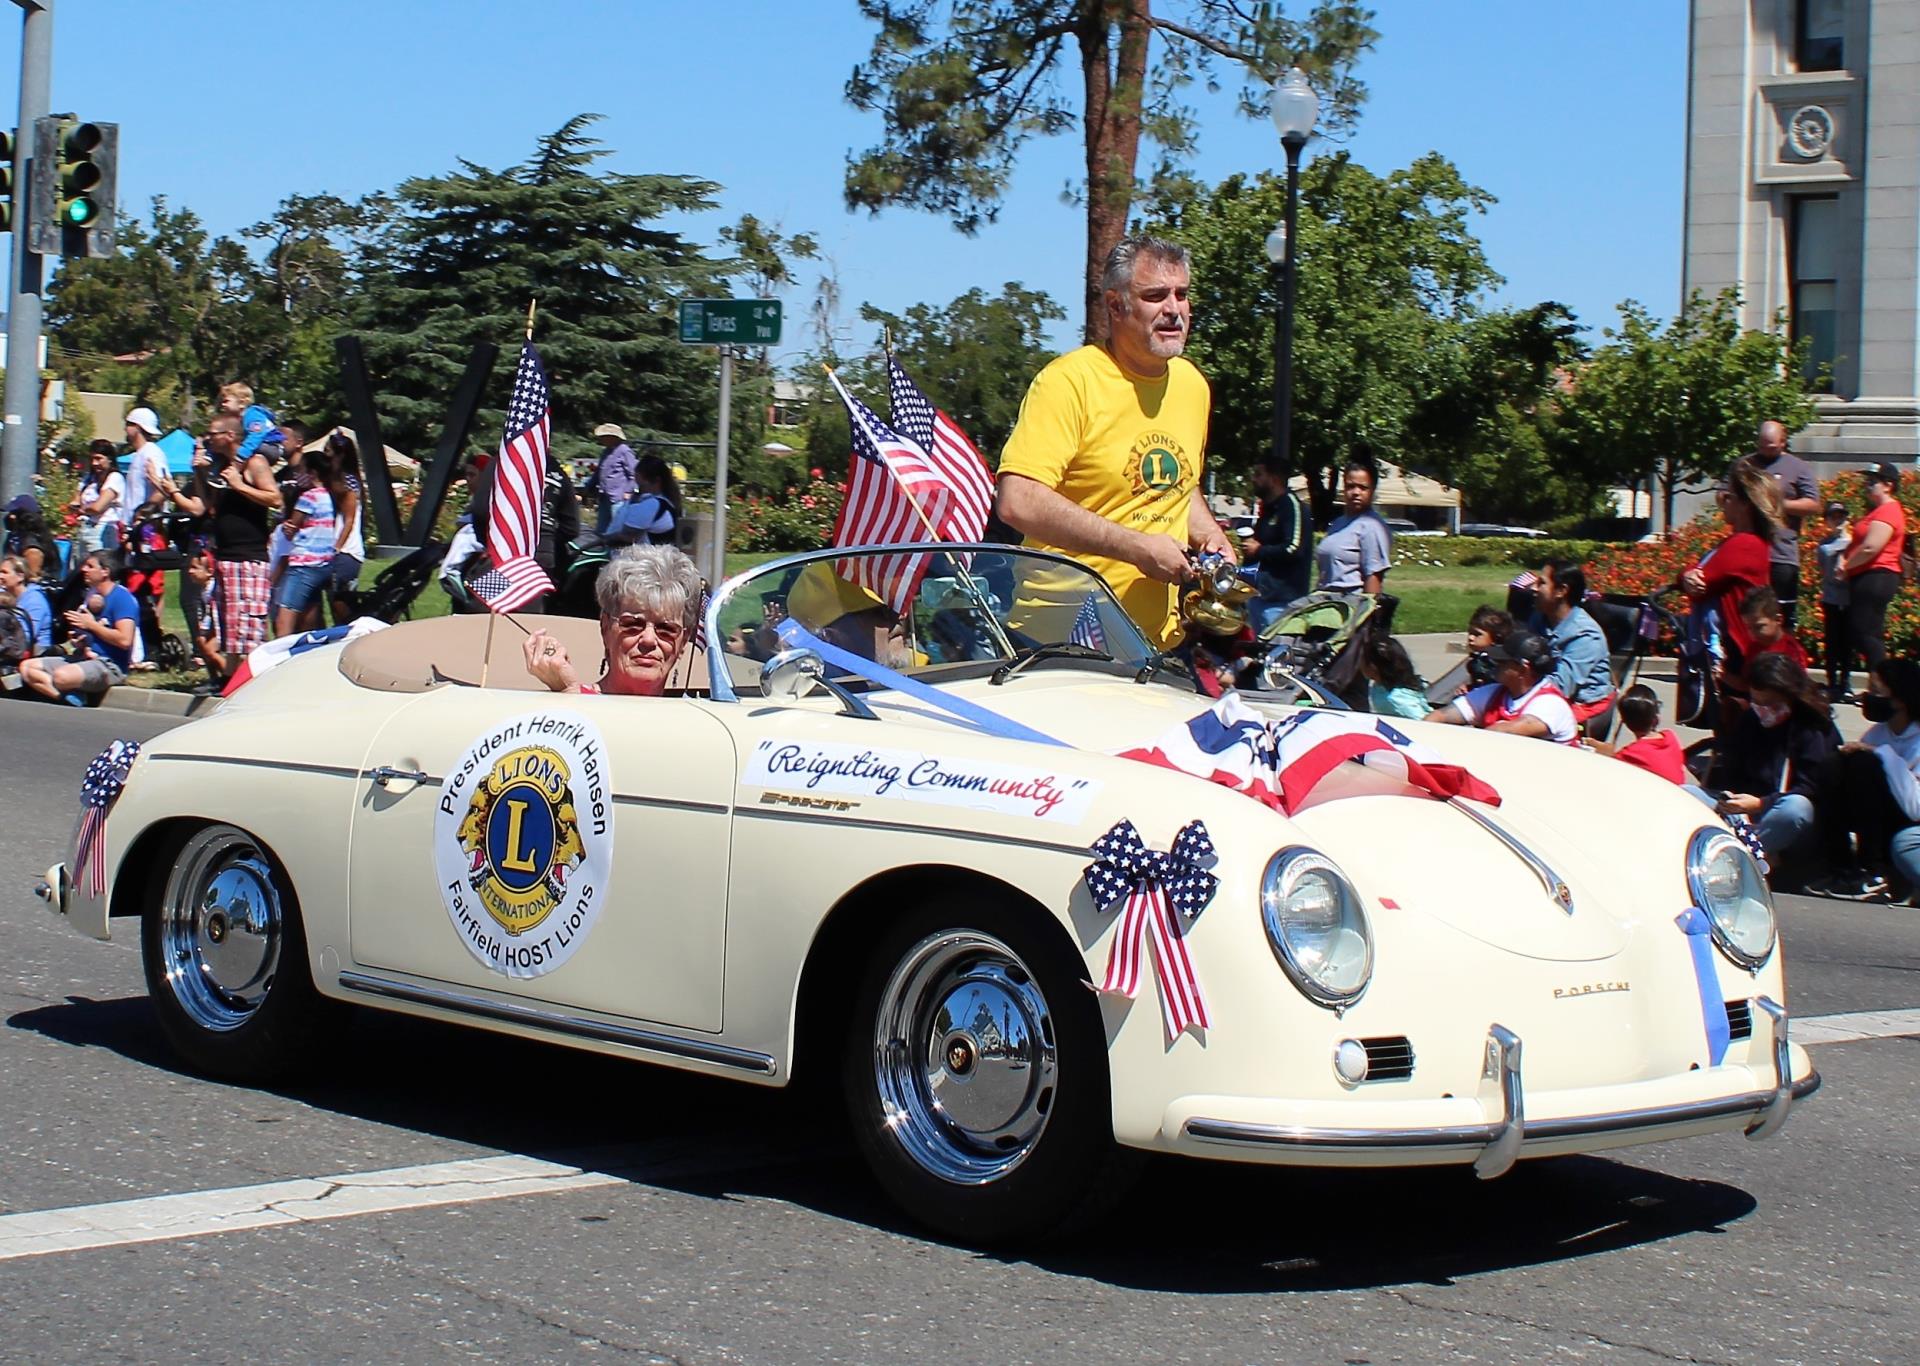 Fairfield Lions car in parade